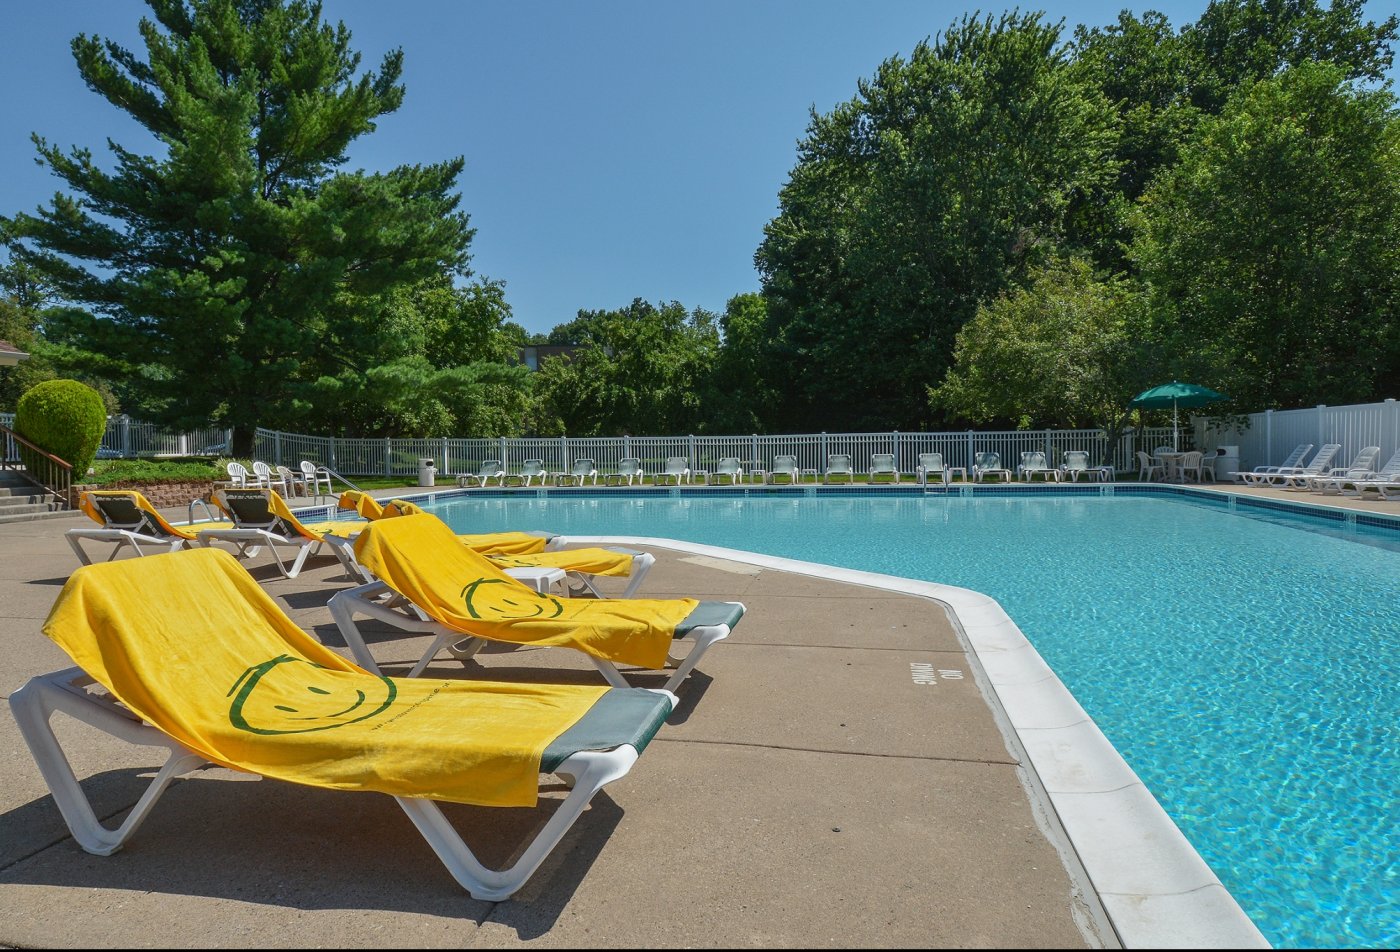 Swimming Pool | Apartment Homes in Langhorne, PA | Summit Trace Apartments